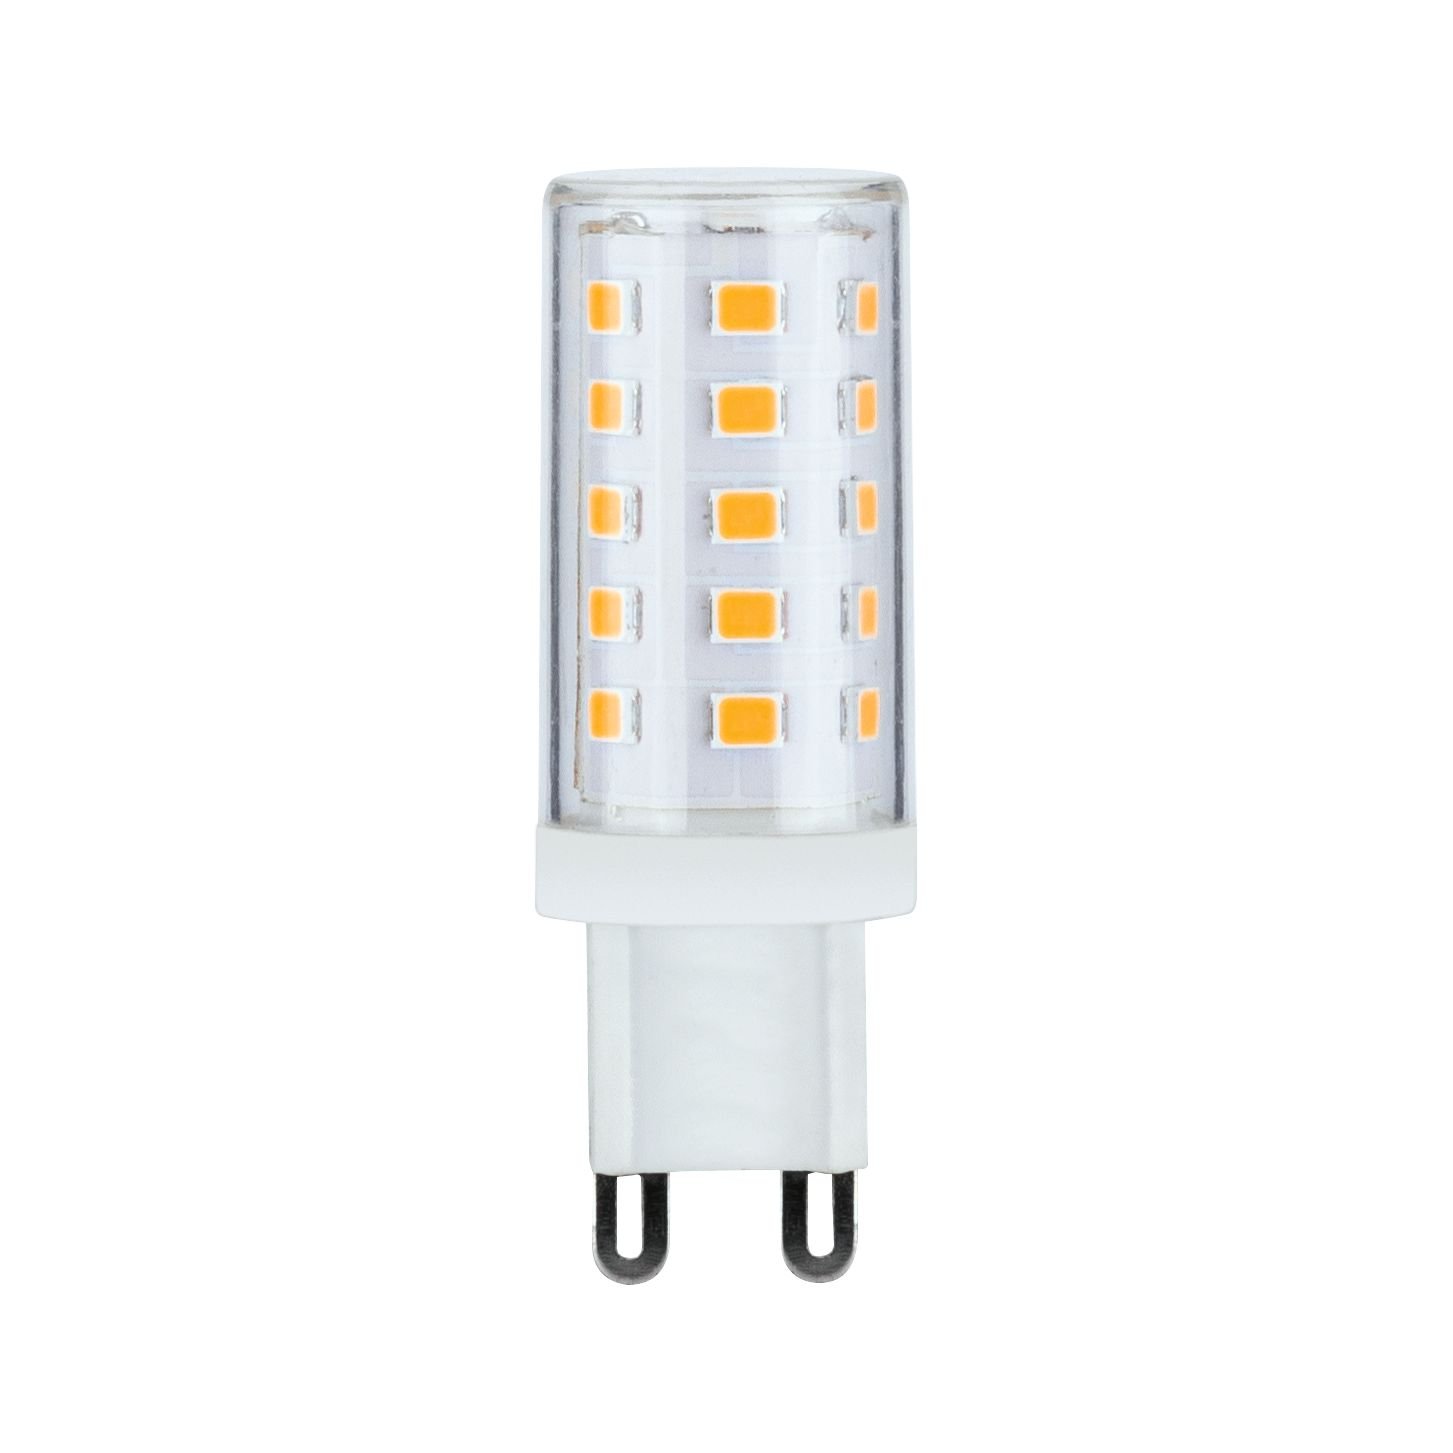 LED Pin base G9 230V 300lm 3W 2700K dimmable Clear